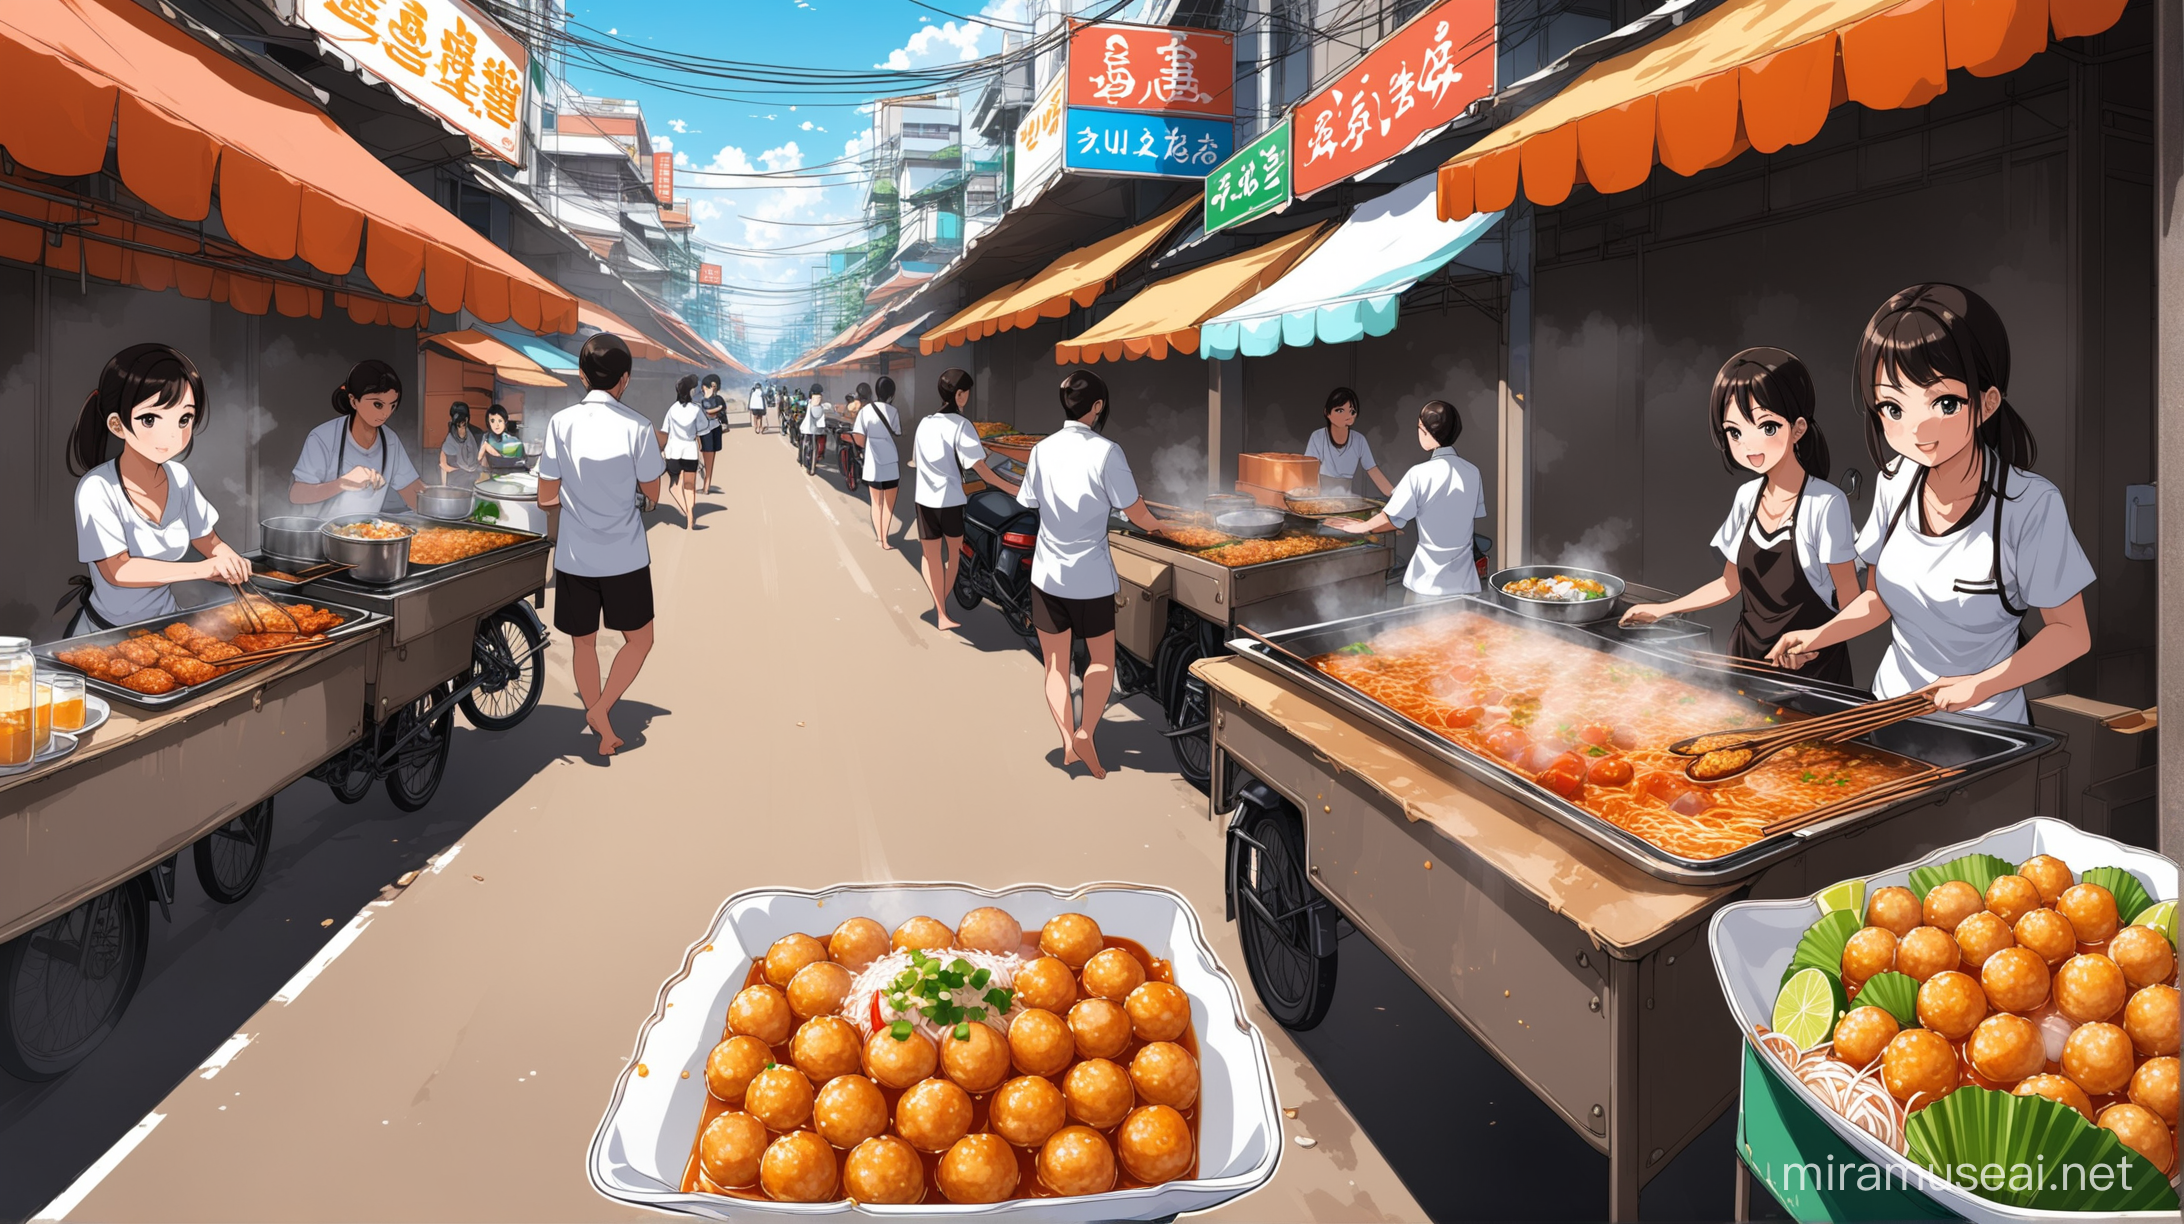 Colorful Thai Street Food Market in Anime Style